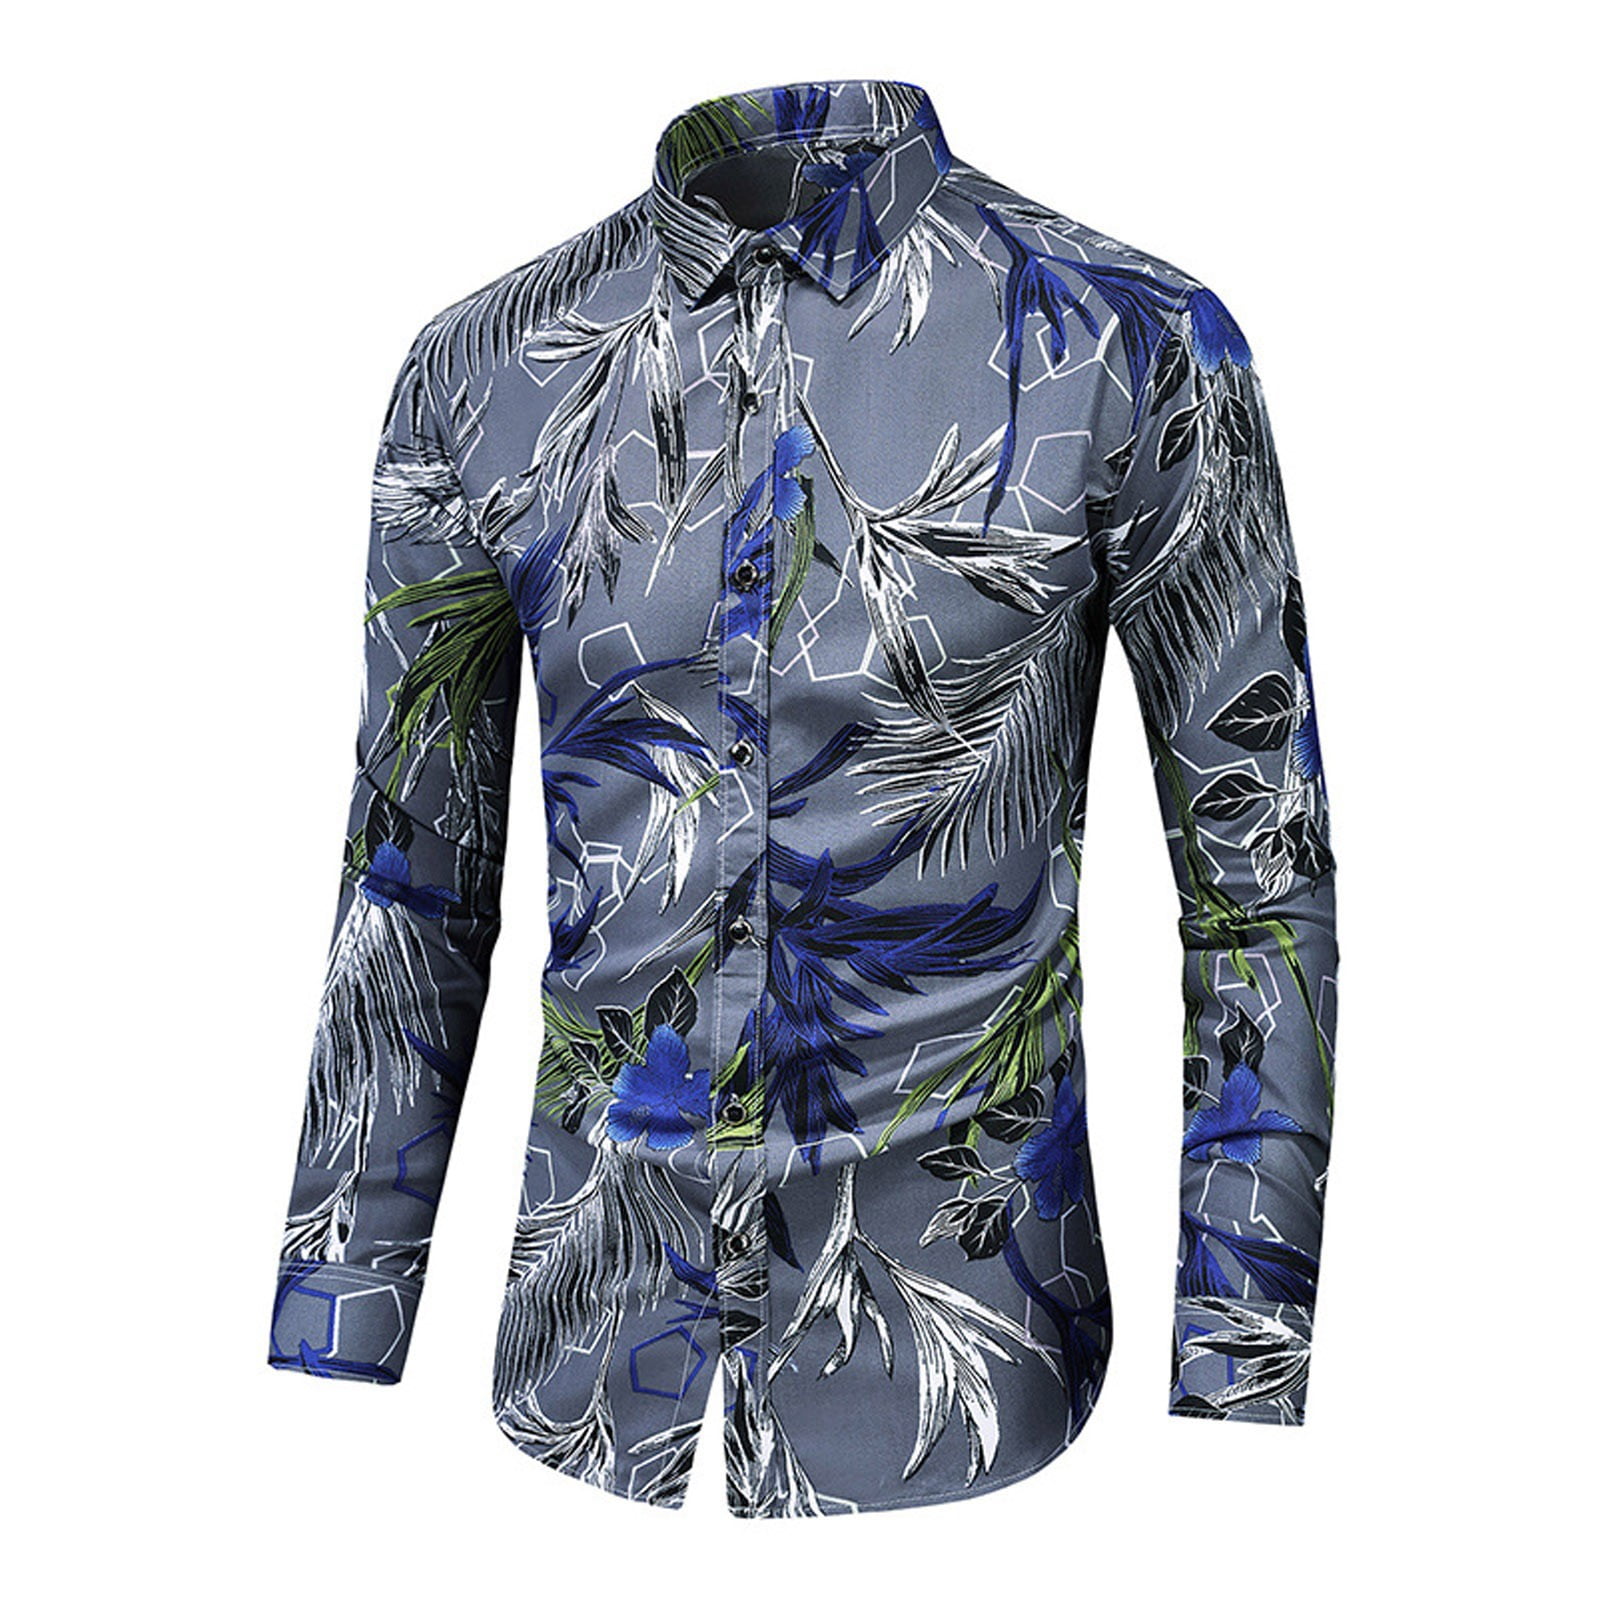 Details about   Mens Dress Shirts Silk Satin Printed Slim Fit Casual Top Shirts Business Fashion 